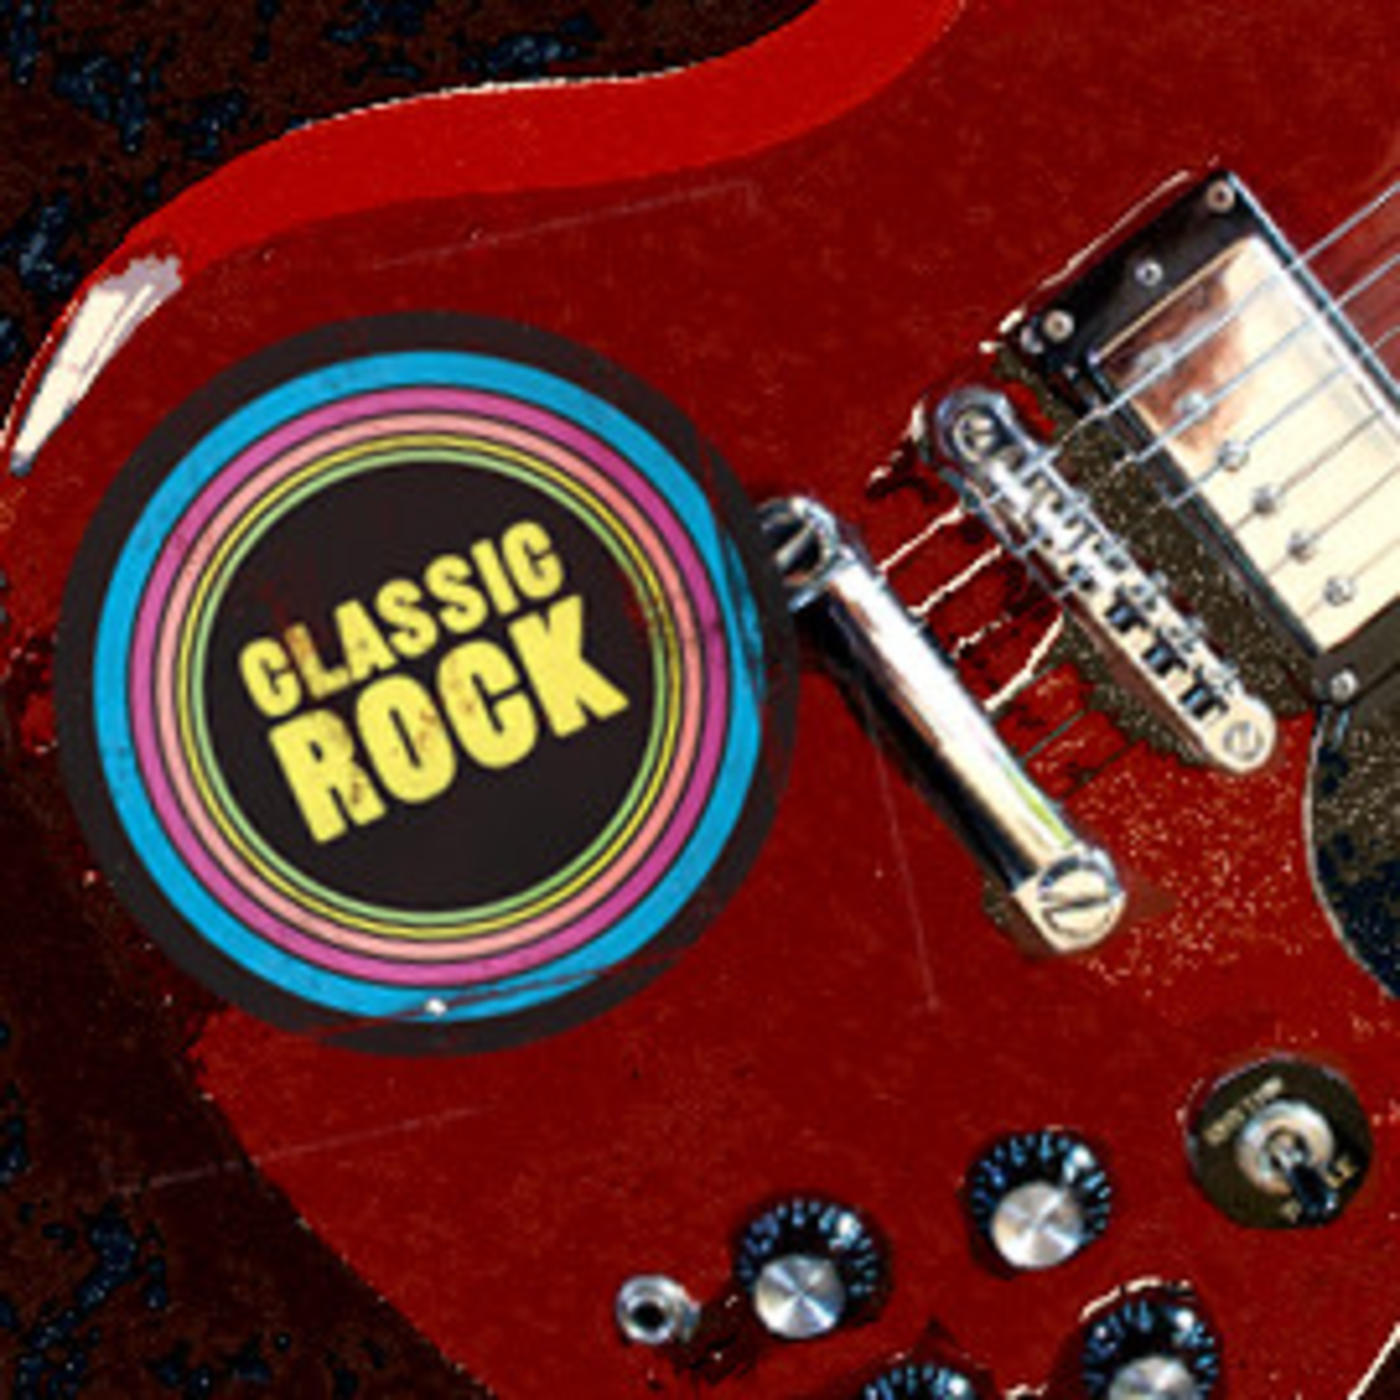 Classic Rock - Led Zeppelin, ZZ Top, Ramones, The Clash, The Who, Van Halen, Neil Young, The Allman Brothers Band, The Rolling Stones, Joe Walsh, The Doors, Dire Straits, XTC